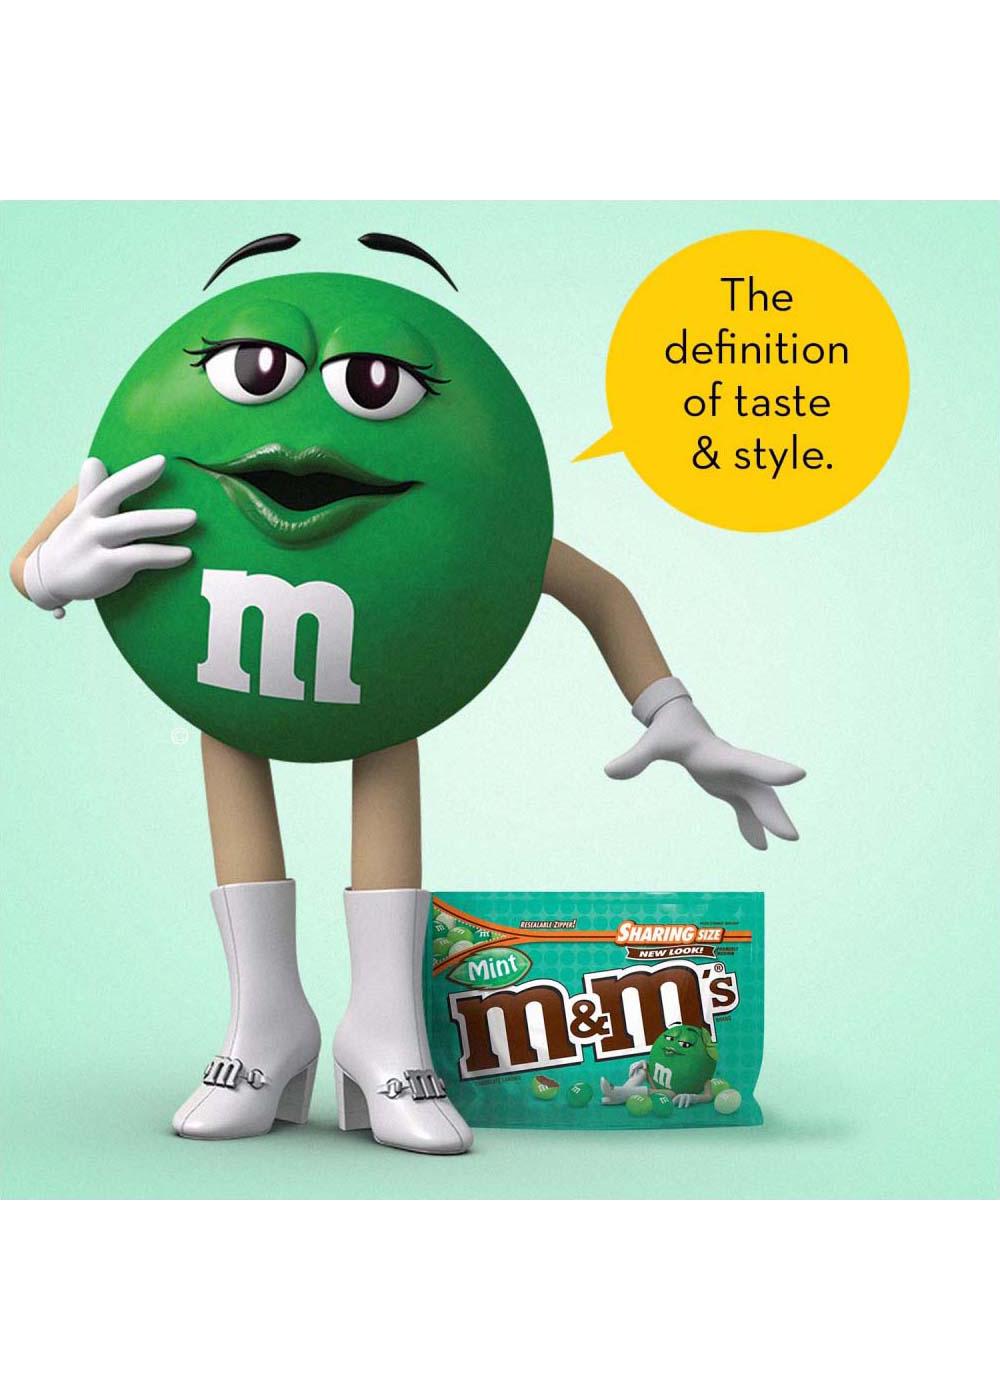 M&M'S Caramel Chocolate Candy Sharing Size 9.6-Ounce Bag